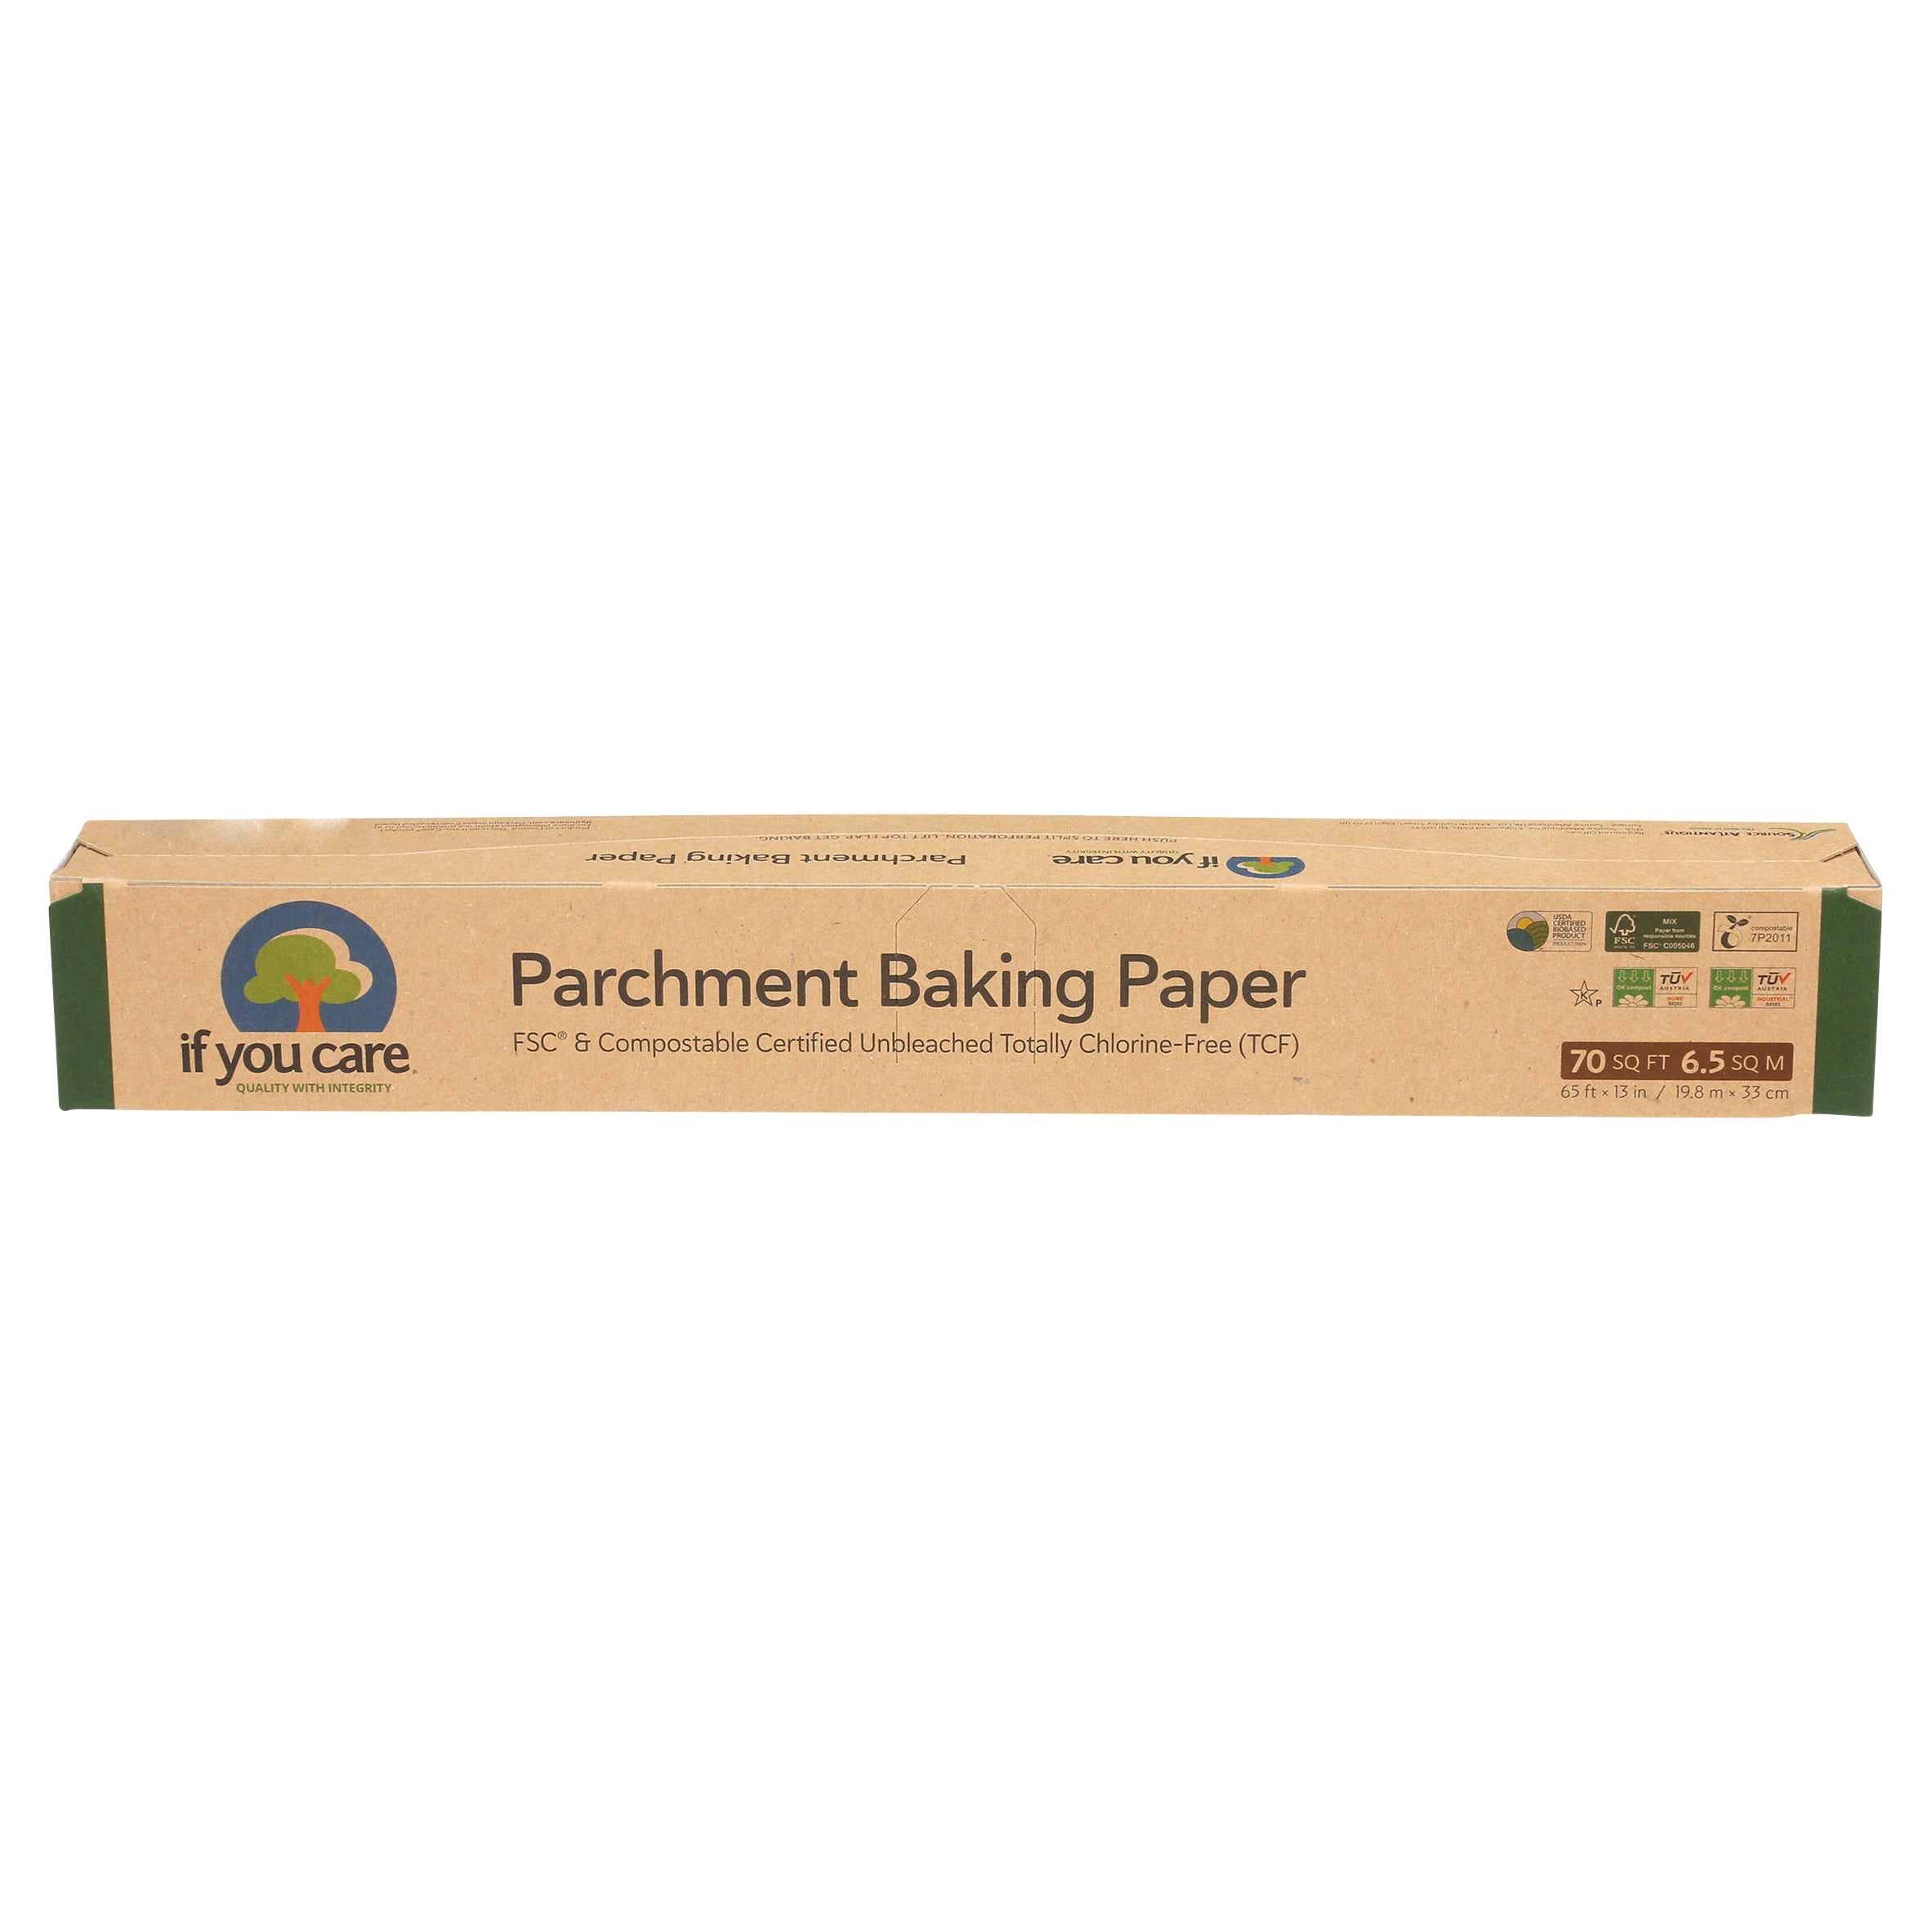 65 Sq Feet Of Wax Paper Great for Microwaving Baking or Storing 